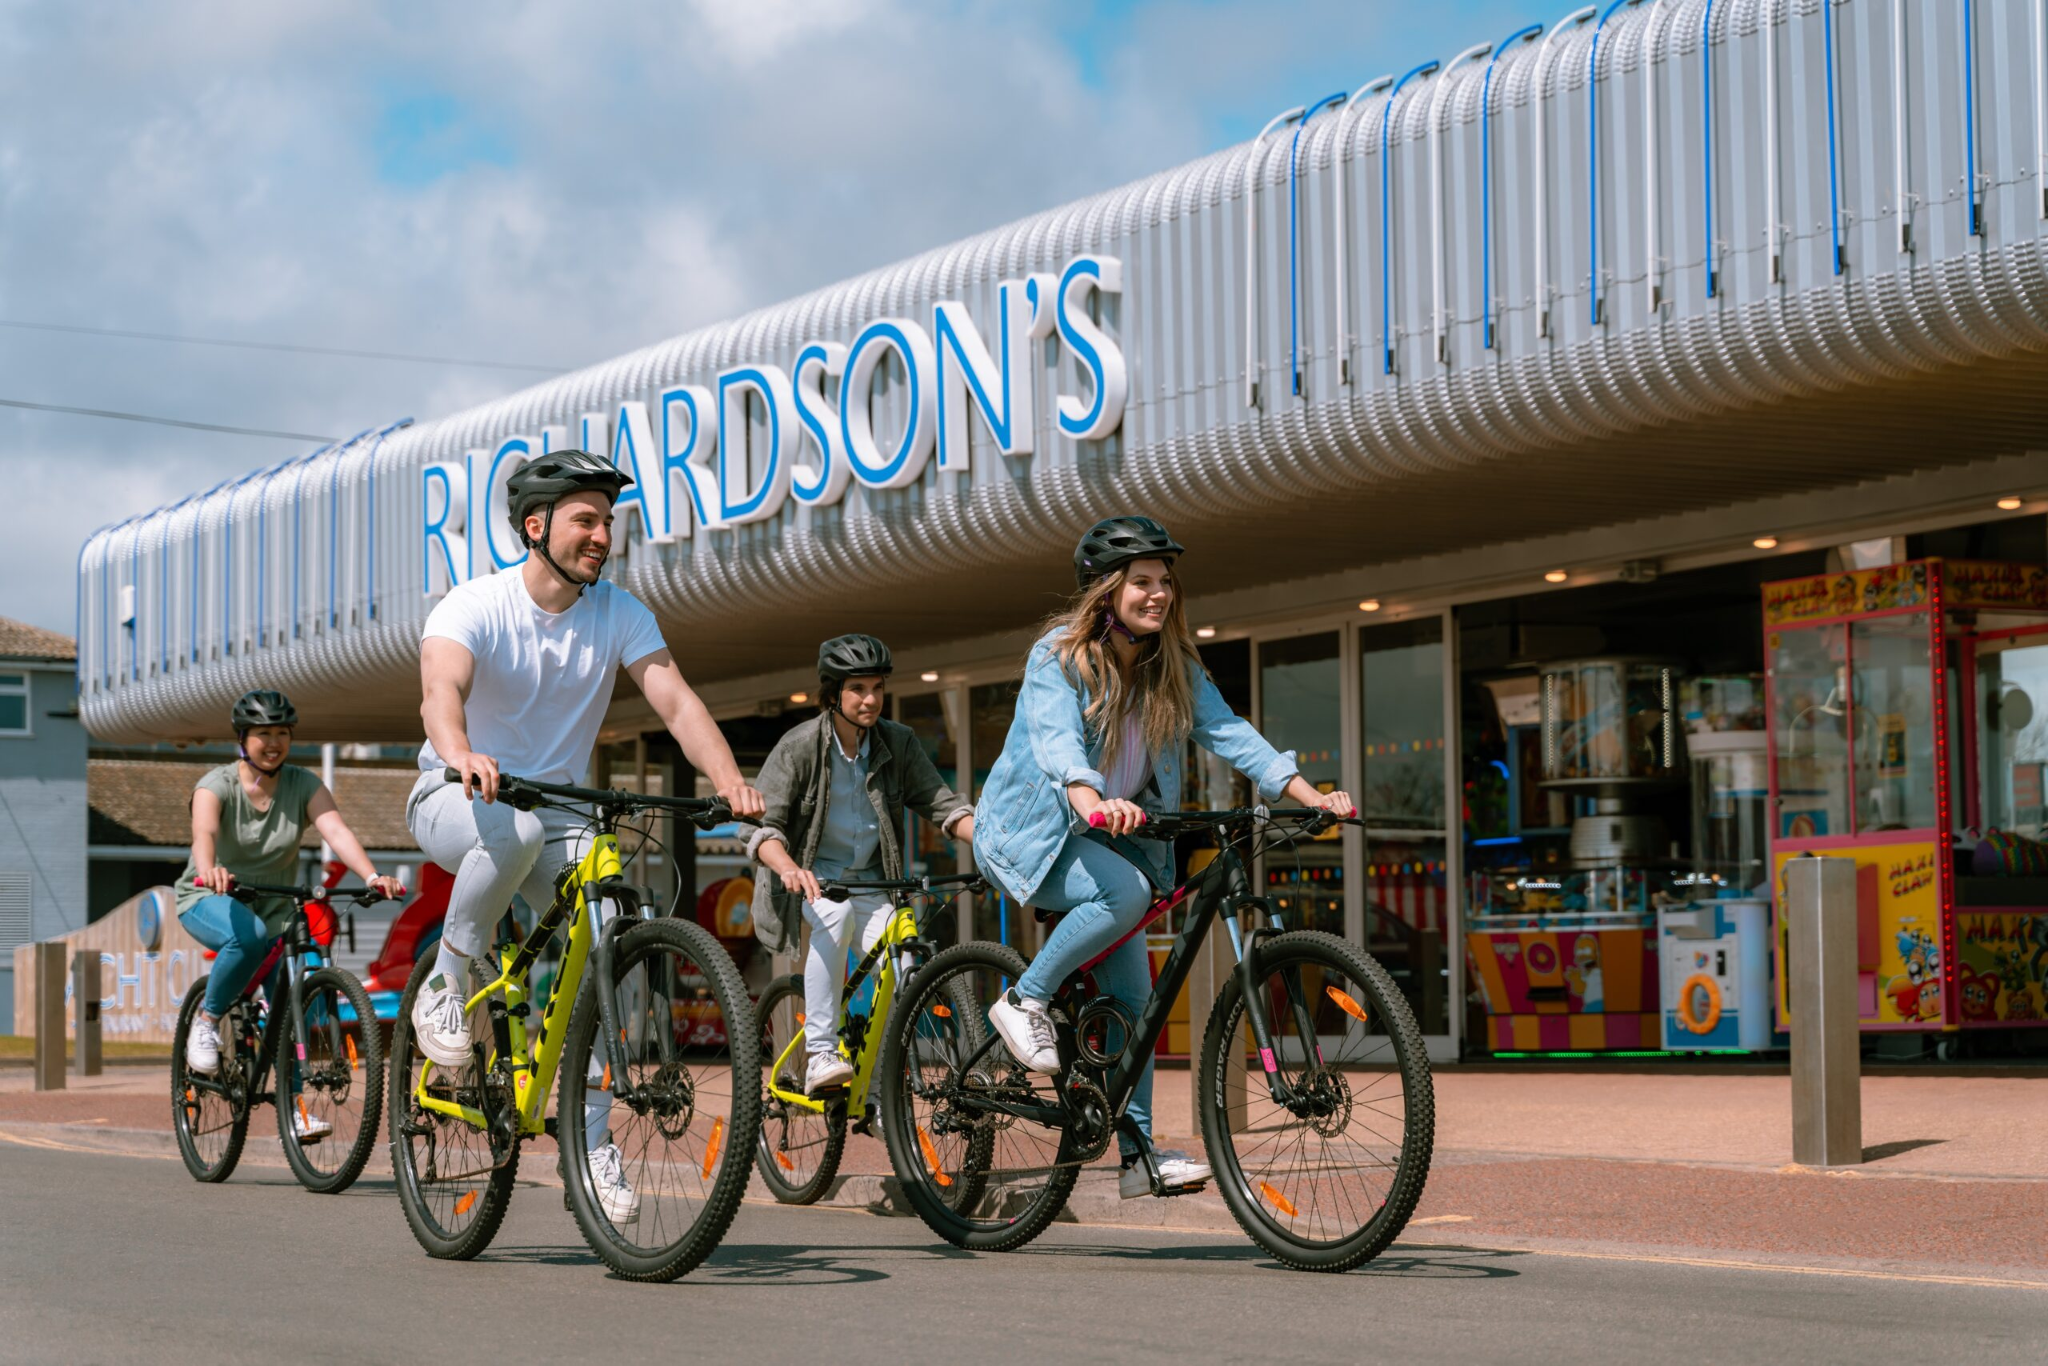 Richardson's is a great company found up and down the broads offering everything from holidays, bike hire and boat hiring